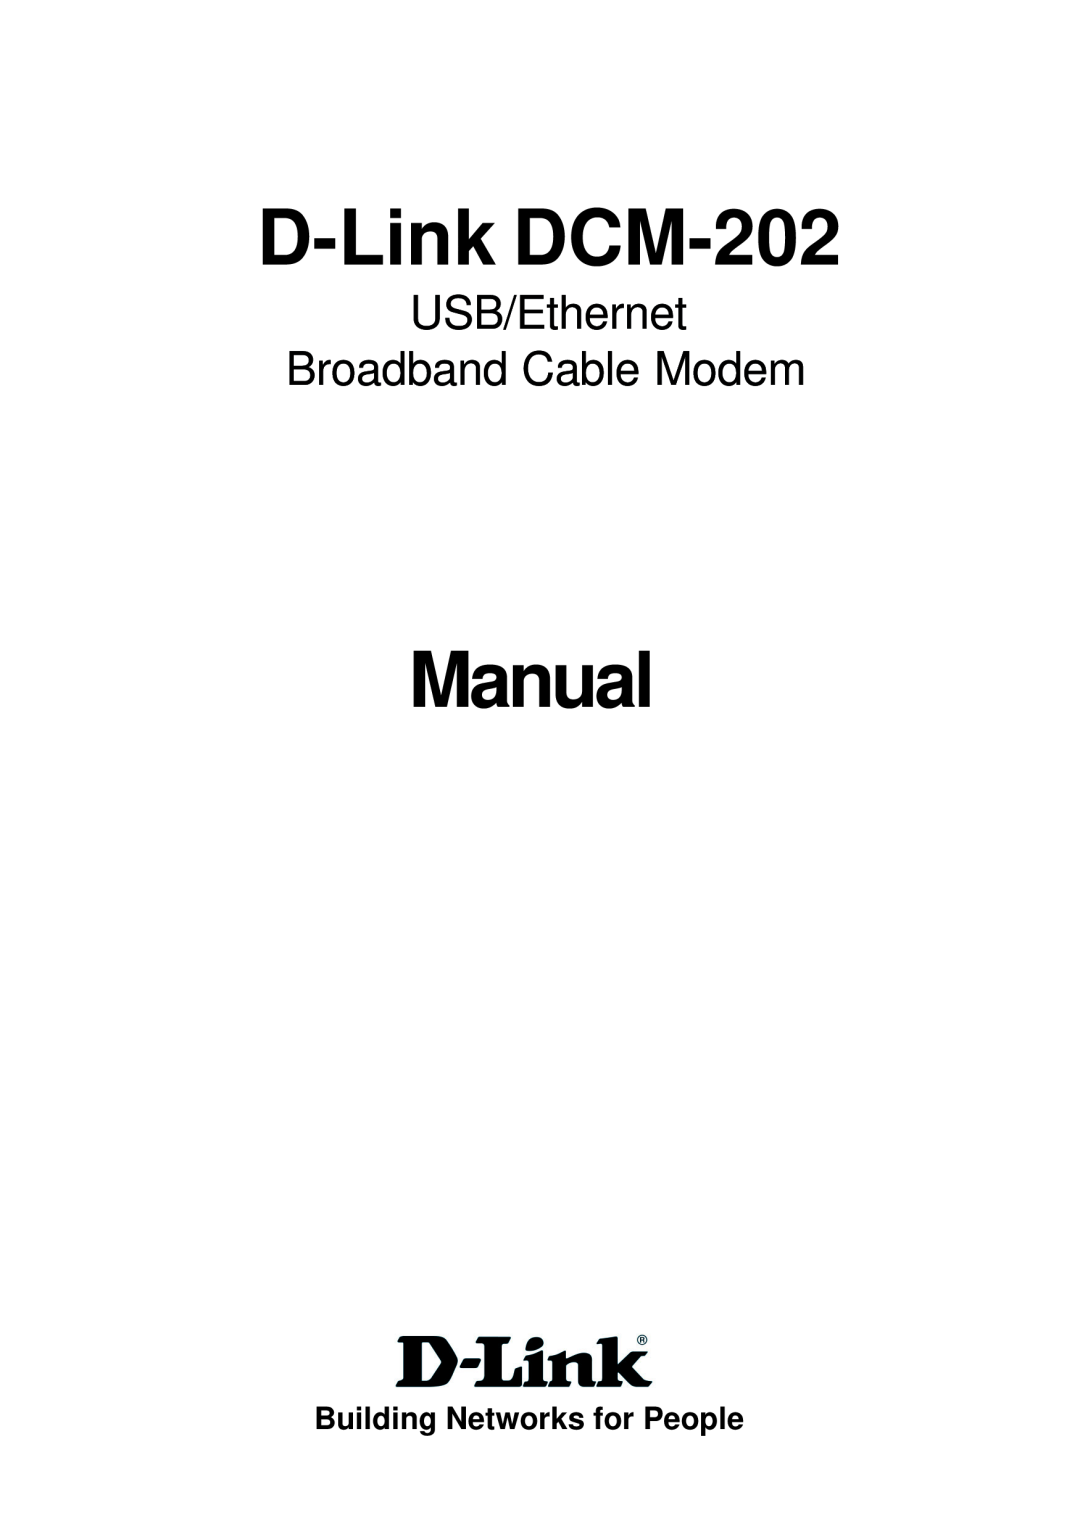 D-Link DCM-202 warranty Before You Begin, Check Your Package Contents, Windows 2000, Windows Me, and, Windows 98SE 